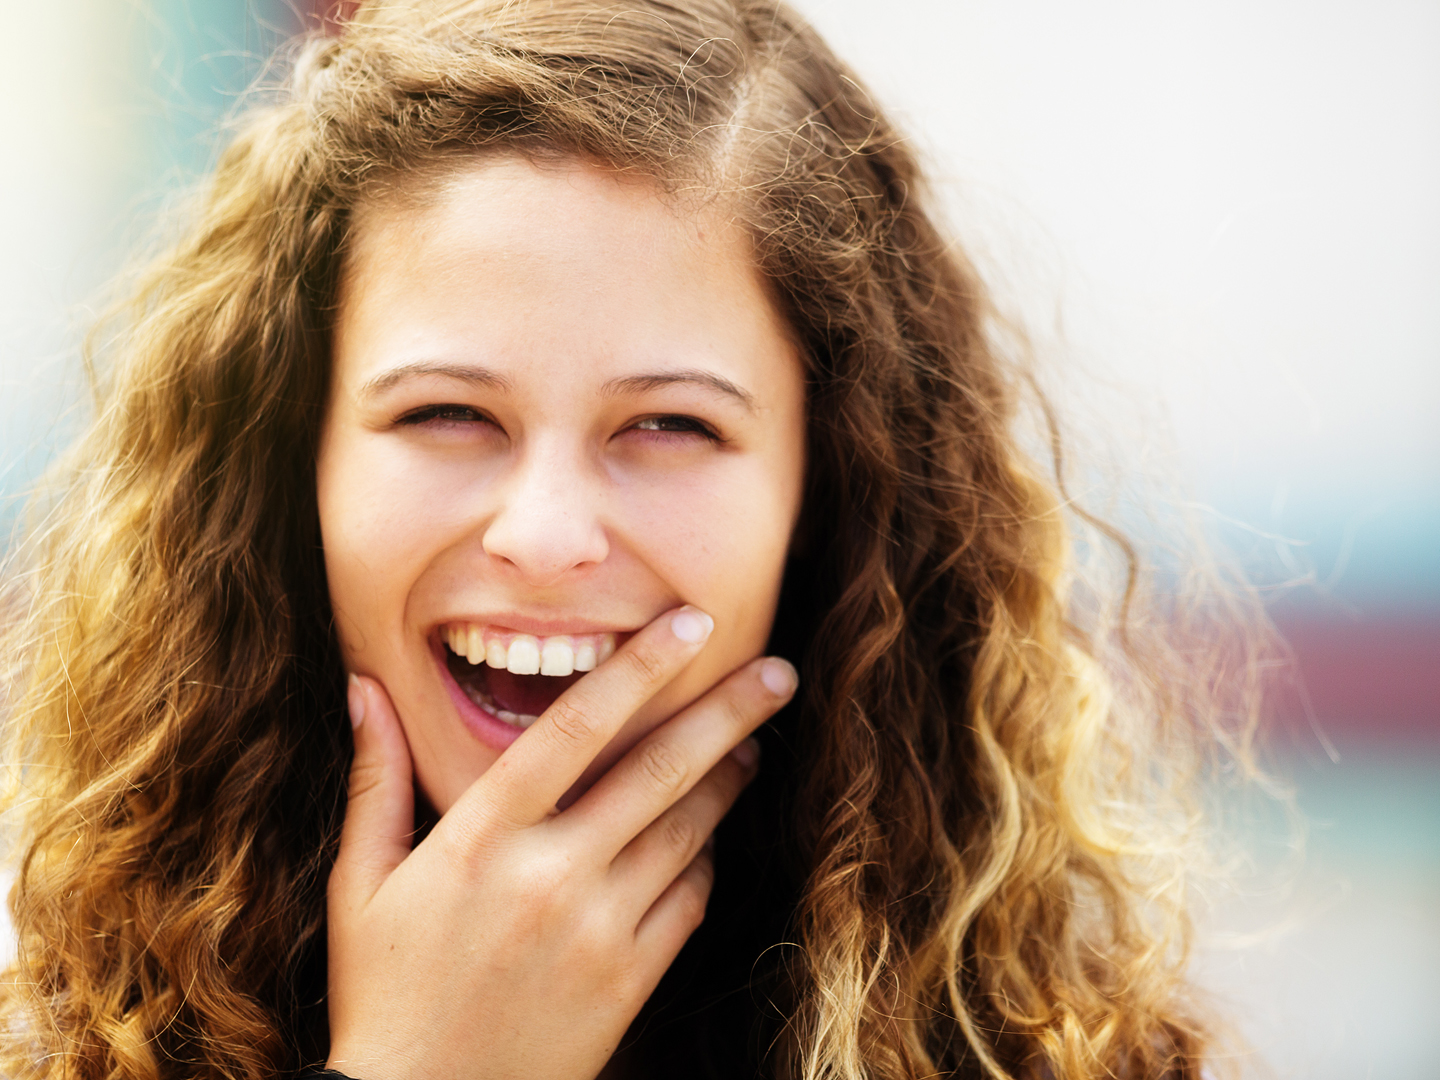 Head and shoulders portrait of a lovely young girl, with curly, honey-blonde hair and brown eyes, laughing happily in the sunshine with her hand partly over her mouth.